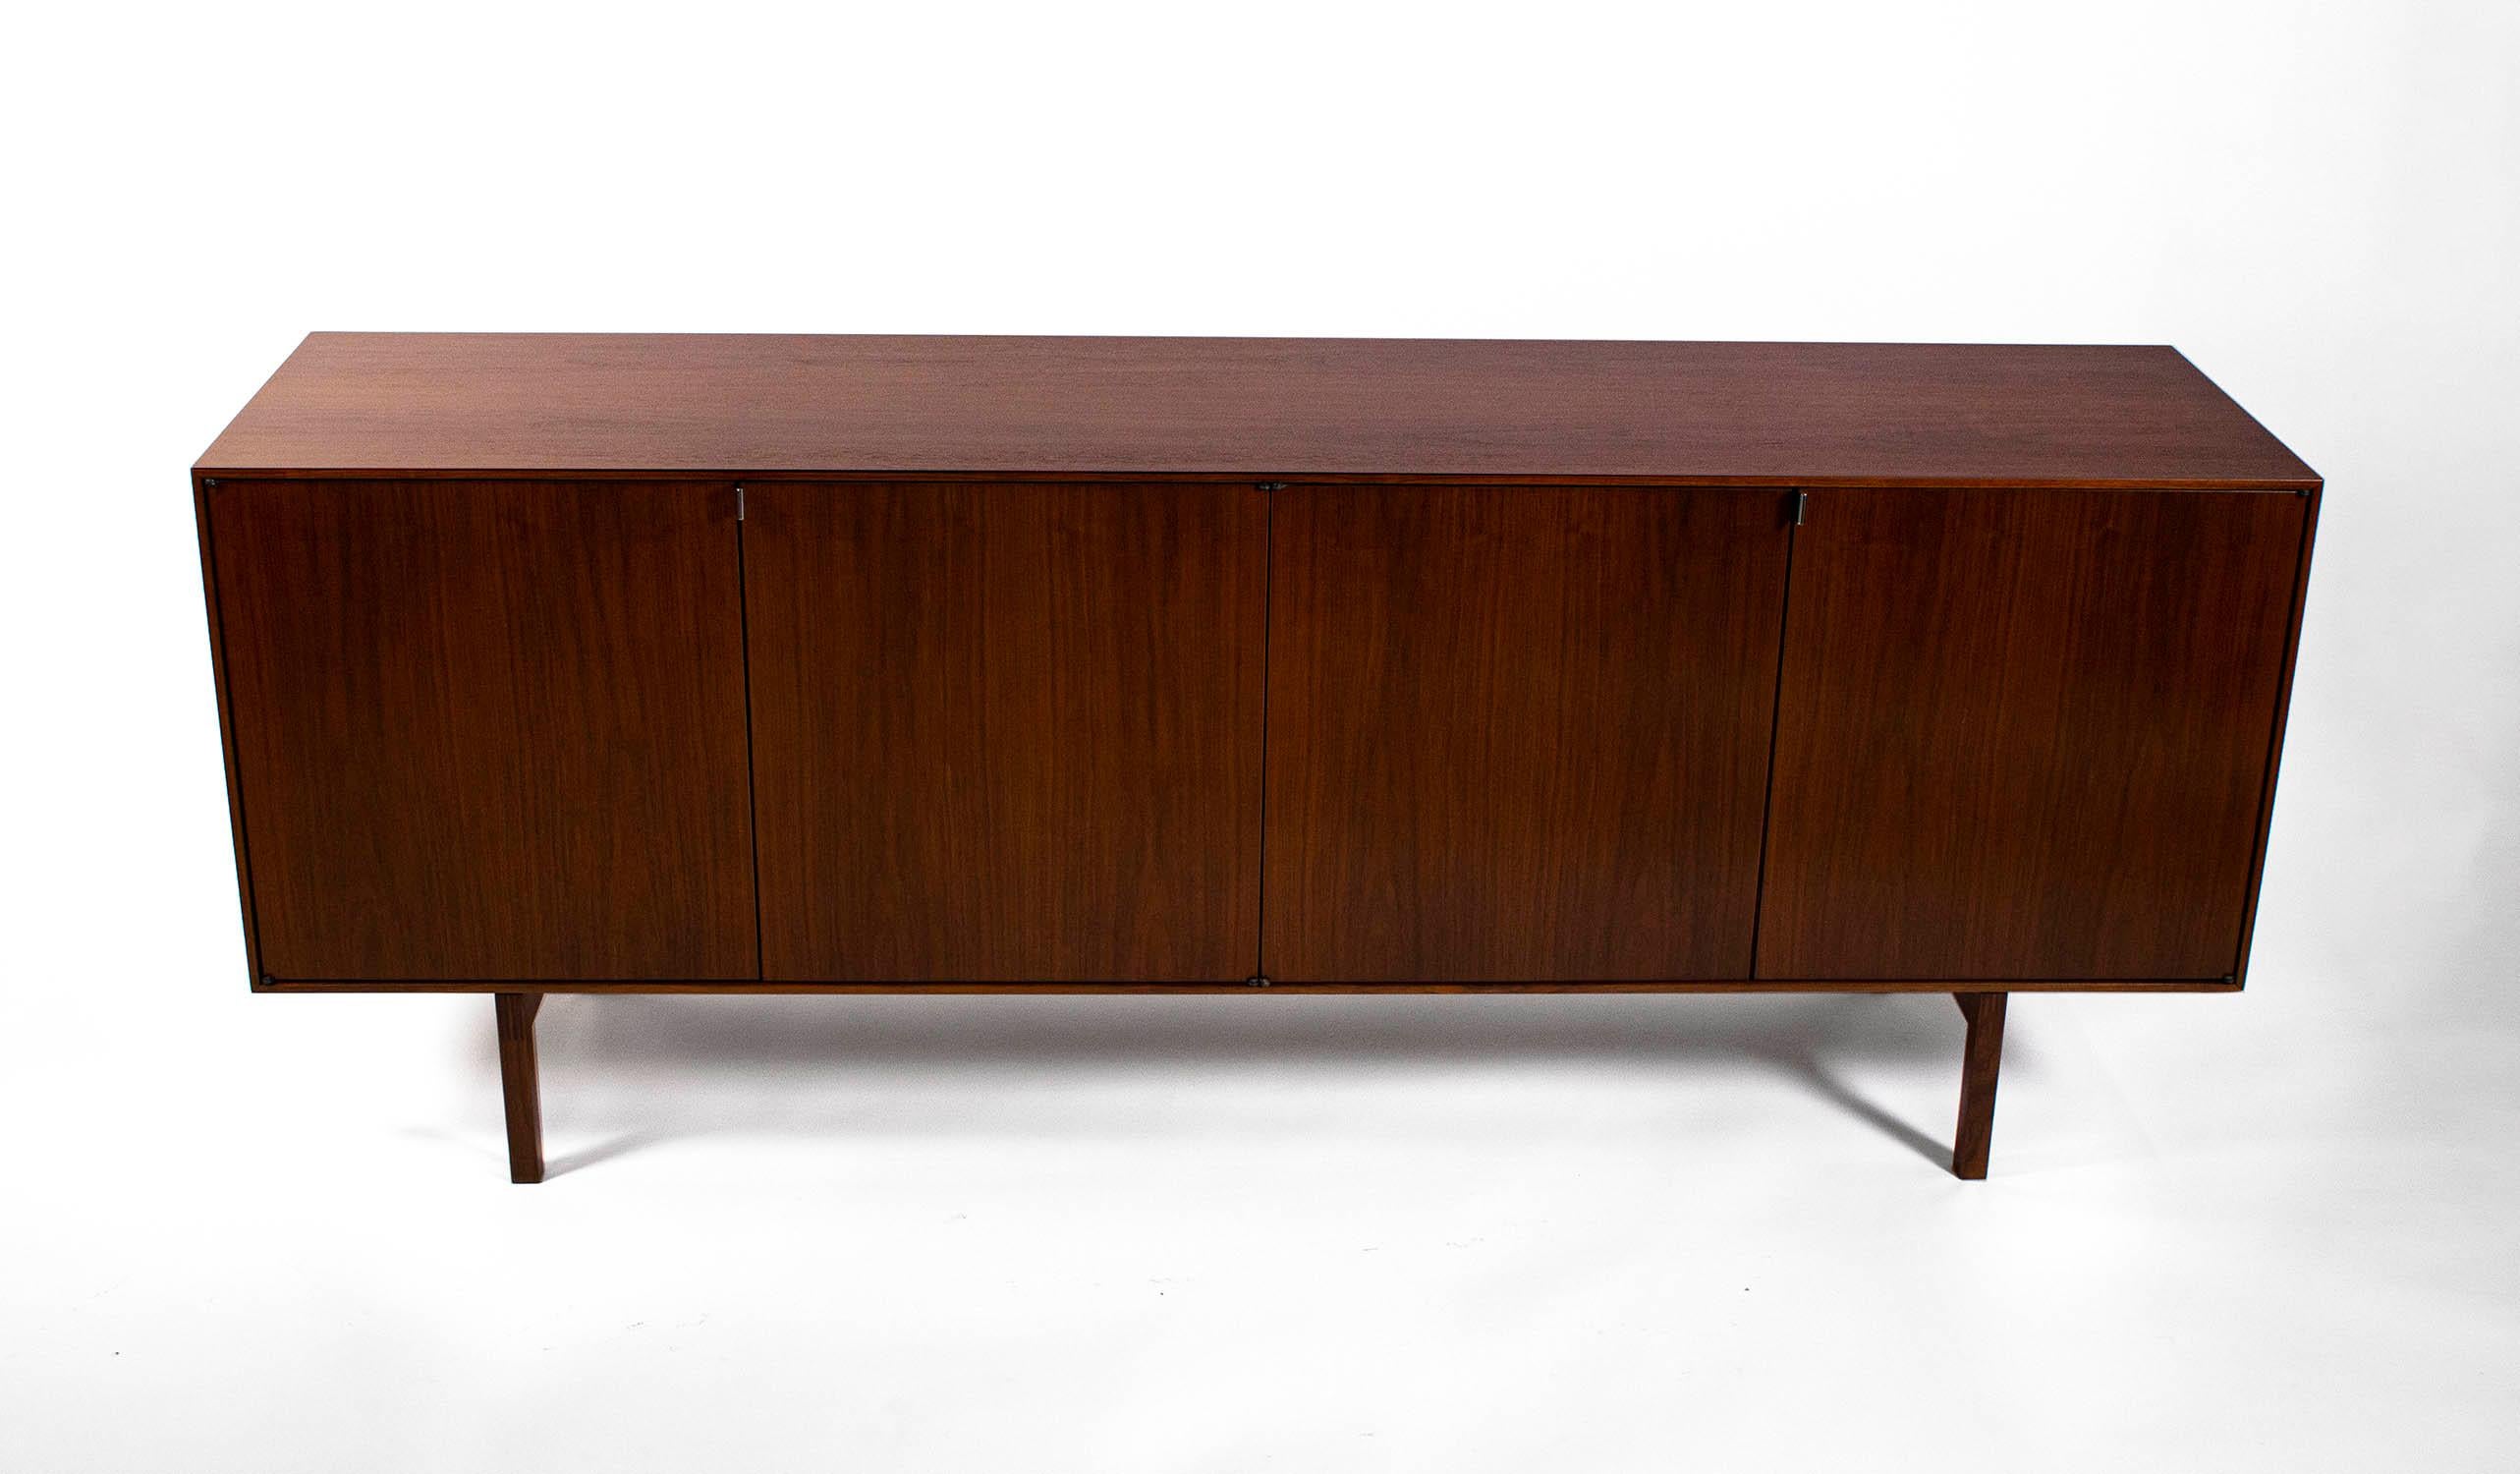 American 1950s Florence Knoll Cabinet in Walnut with Maple Interior Model No. 541